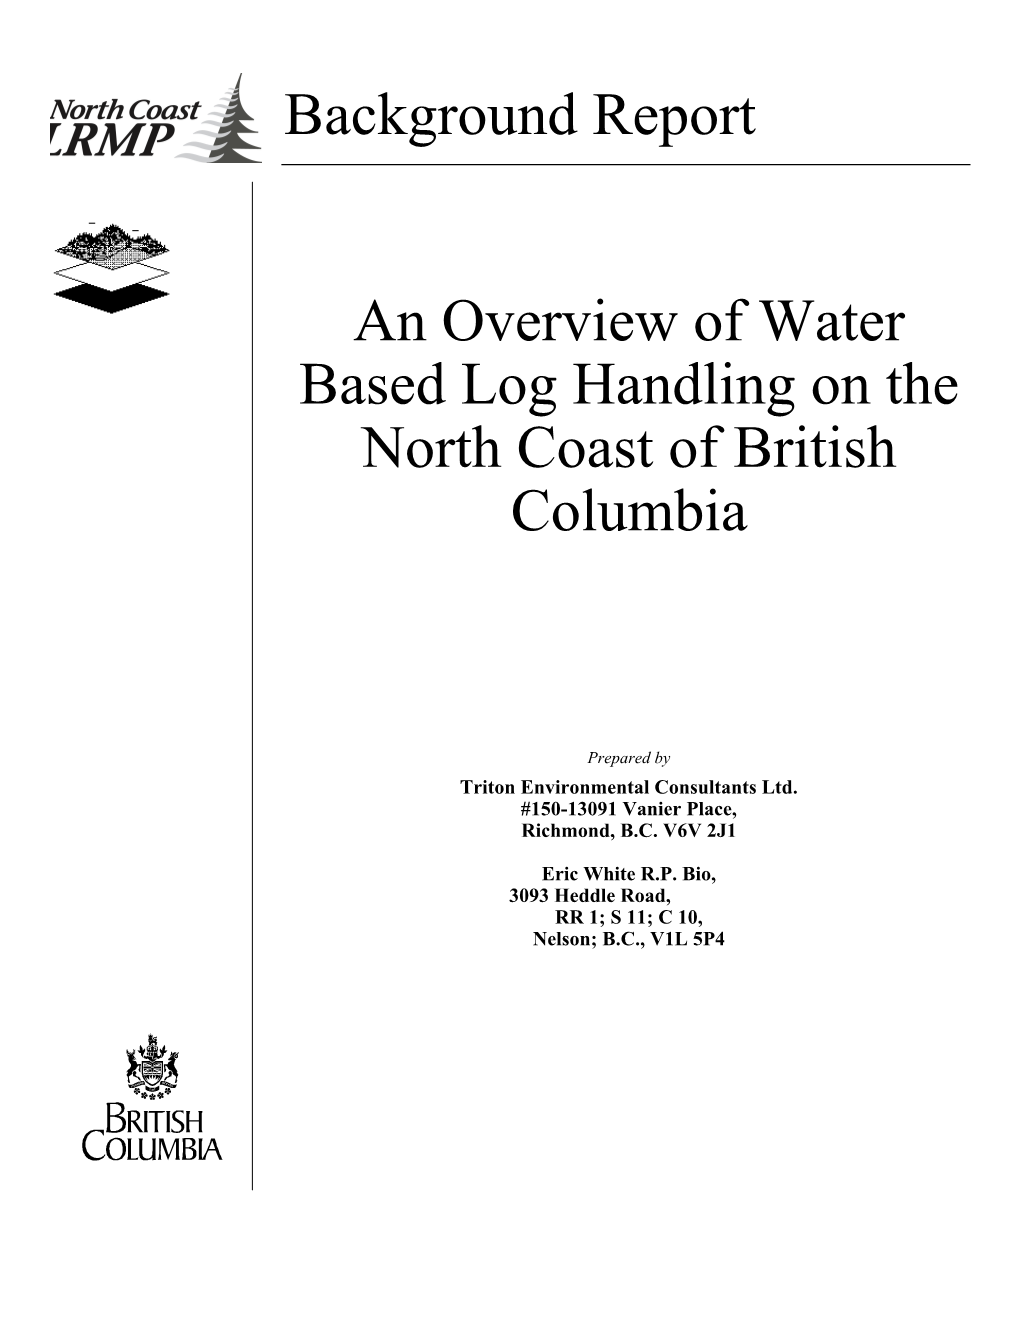 Background Report an Overview of Water Based Log Handling on the North Coast of British Columbia